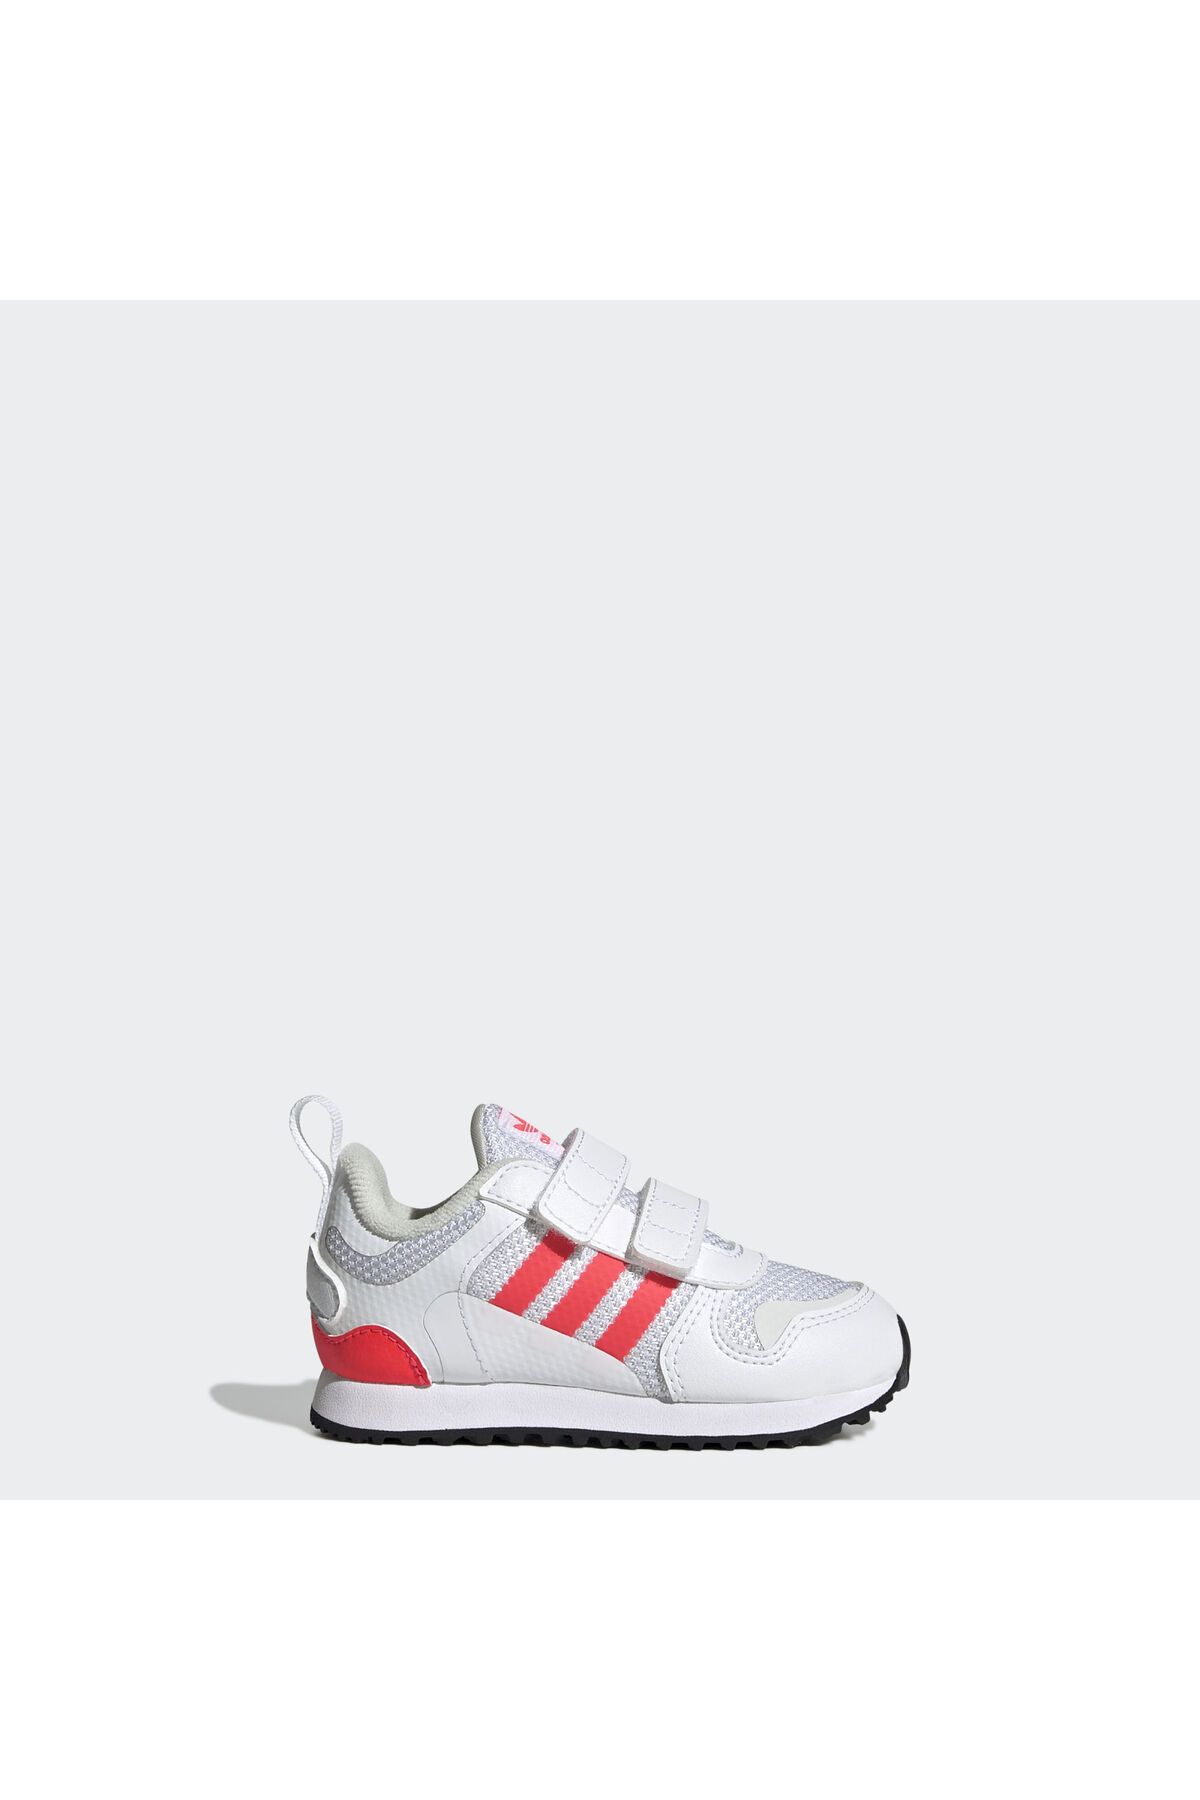 adidas Zx 700 Hd Shoes